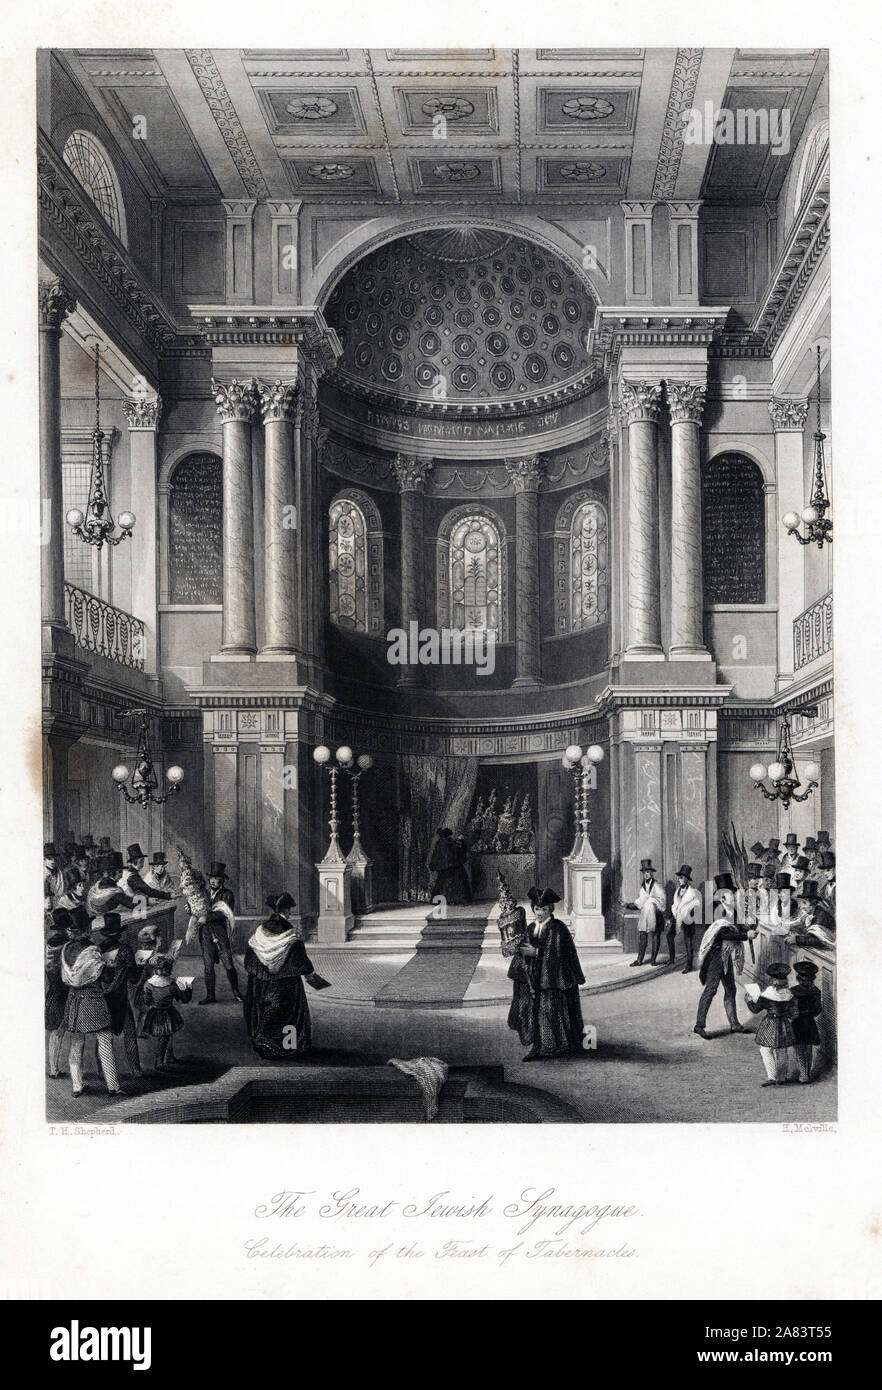 Celebration of the Feast of Tabernacles at the Great Synagogue, St. Helen's Place. Steel engraving by Henry Melville after an illustration by Thomas Hosmer Shepherd from London Interiors, Their Costumes and Ceremonies, Joshua Mead, London, 1841. Stock Photo